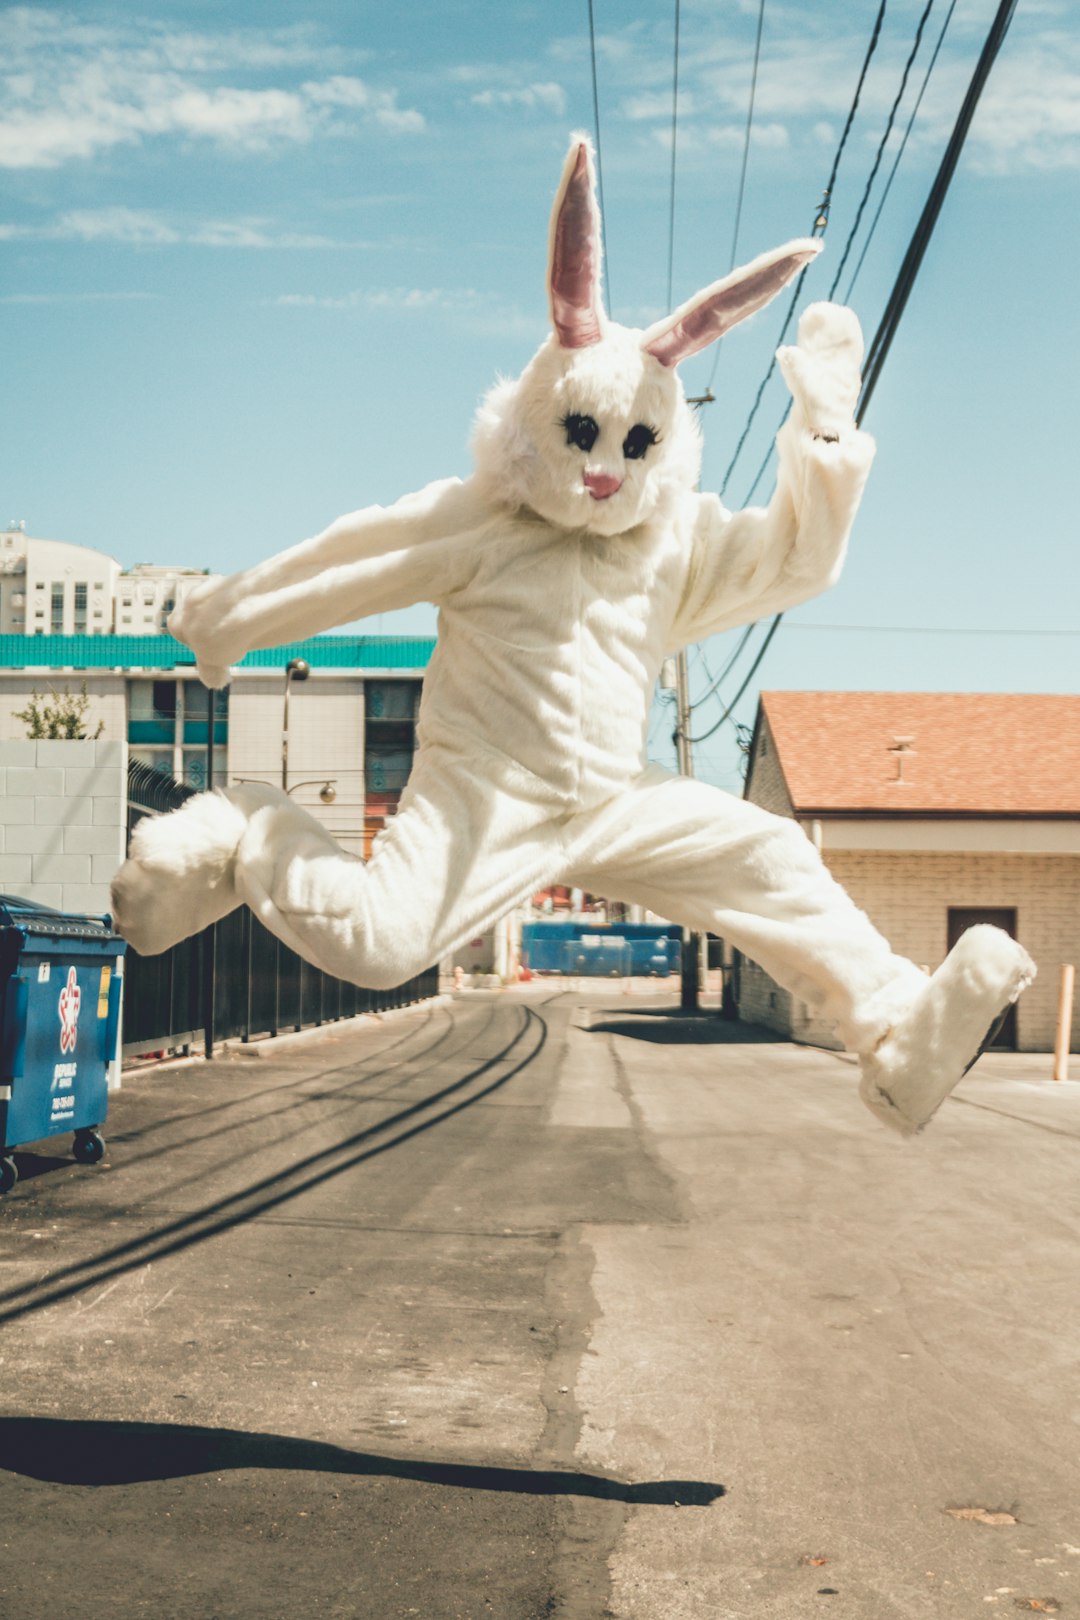  man in bunny costume in mid air in time lapse photography rabbit